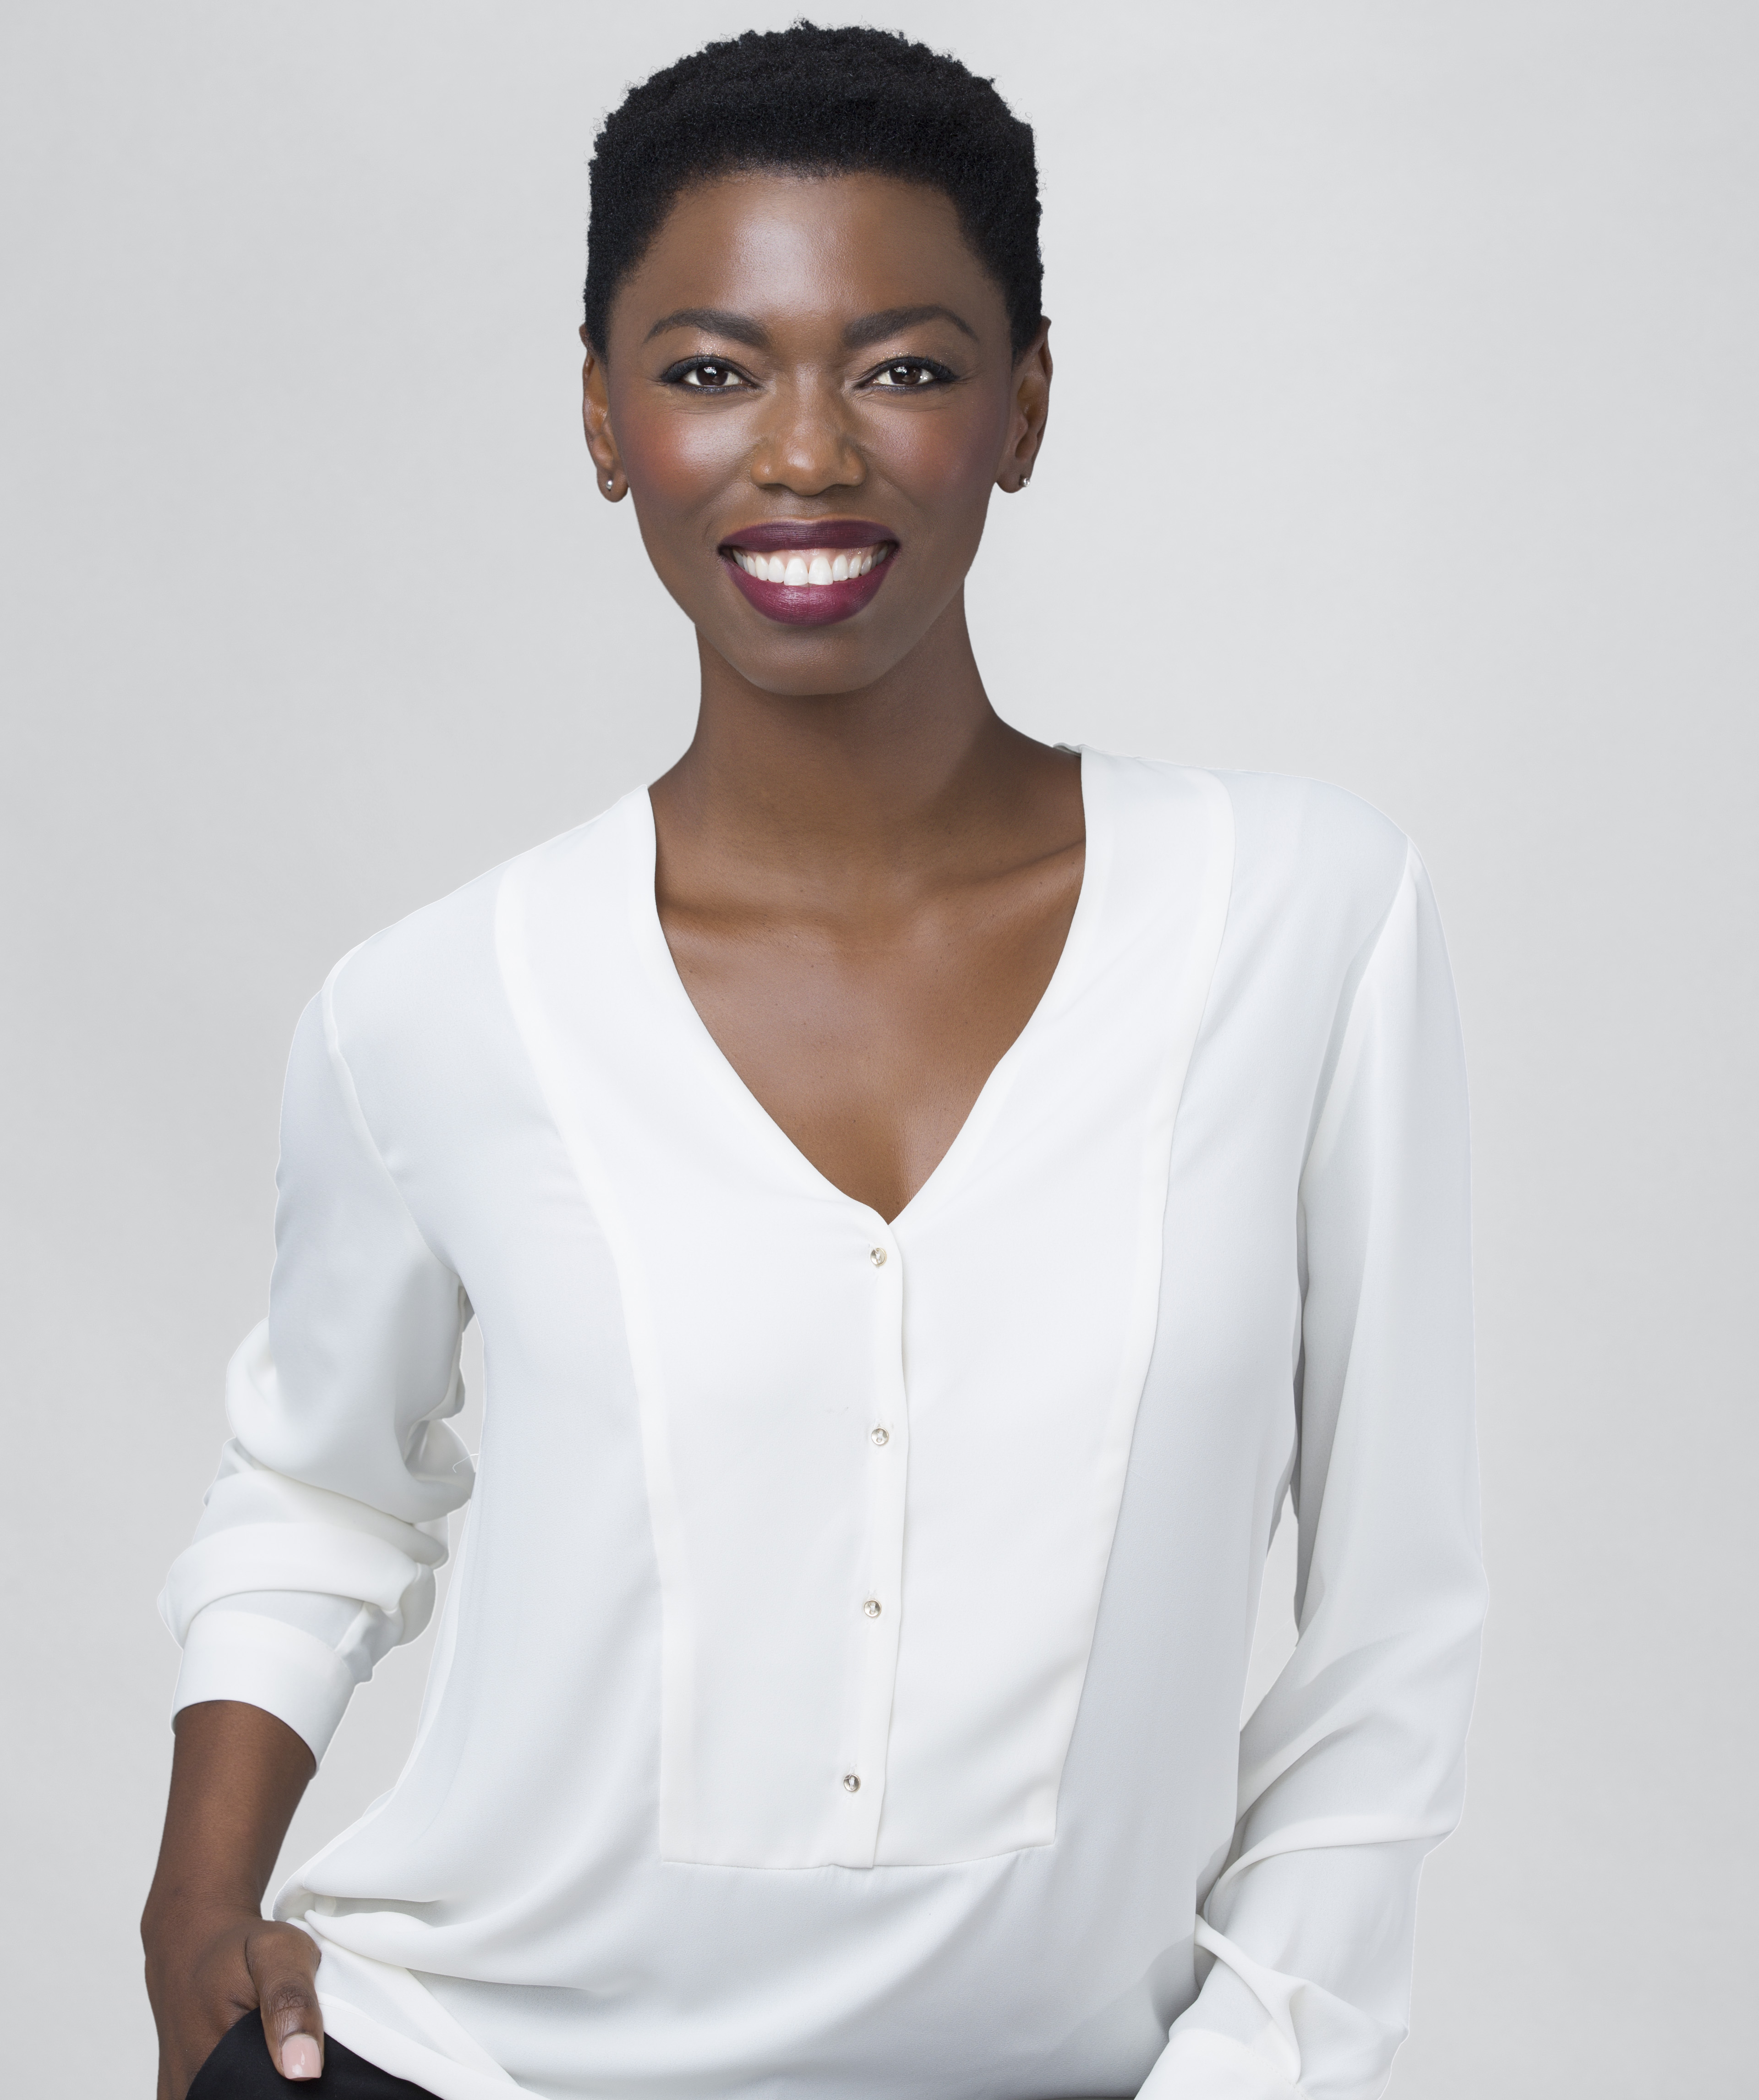 Lira named as first African influencer for Bobbi Brown
